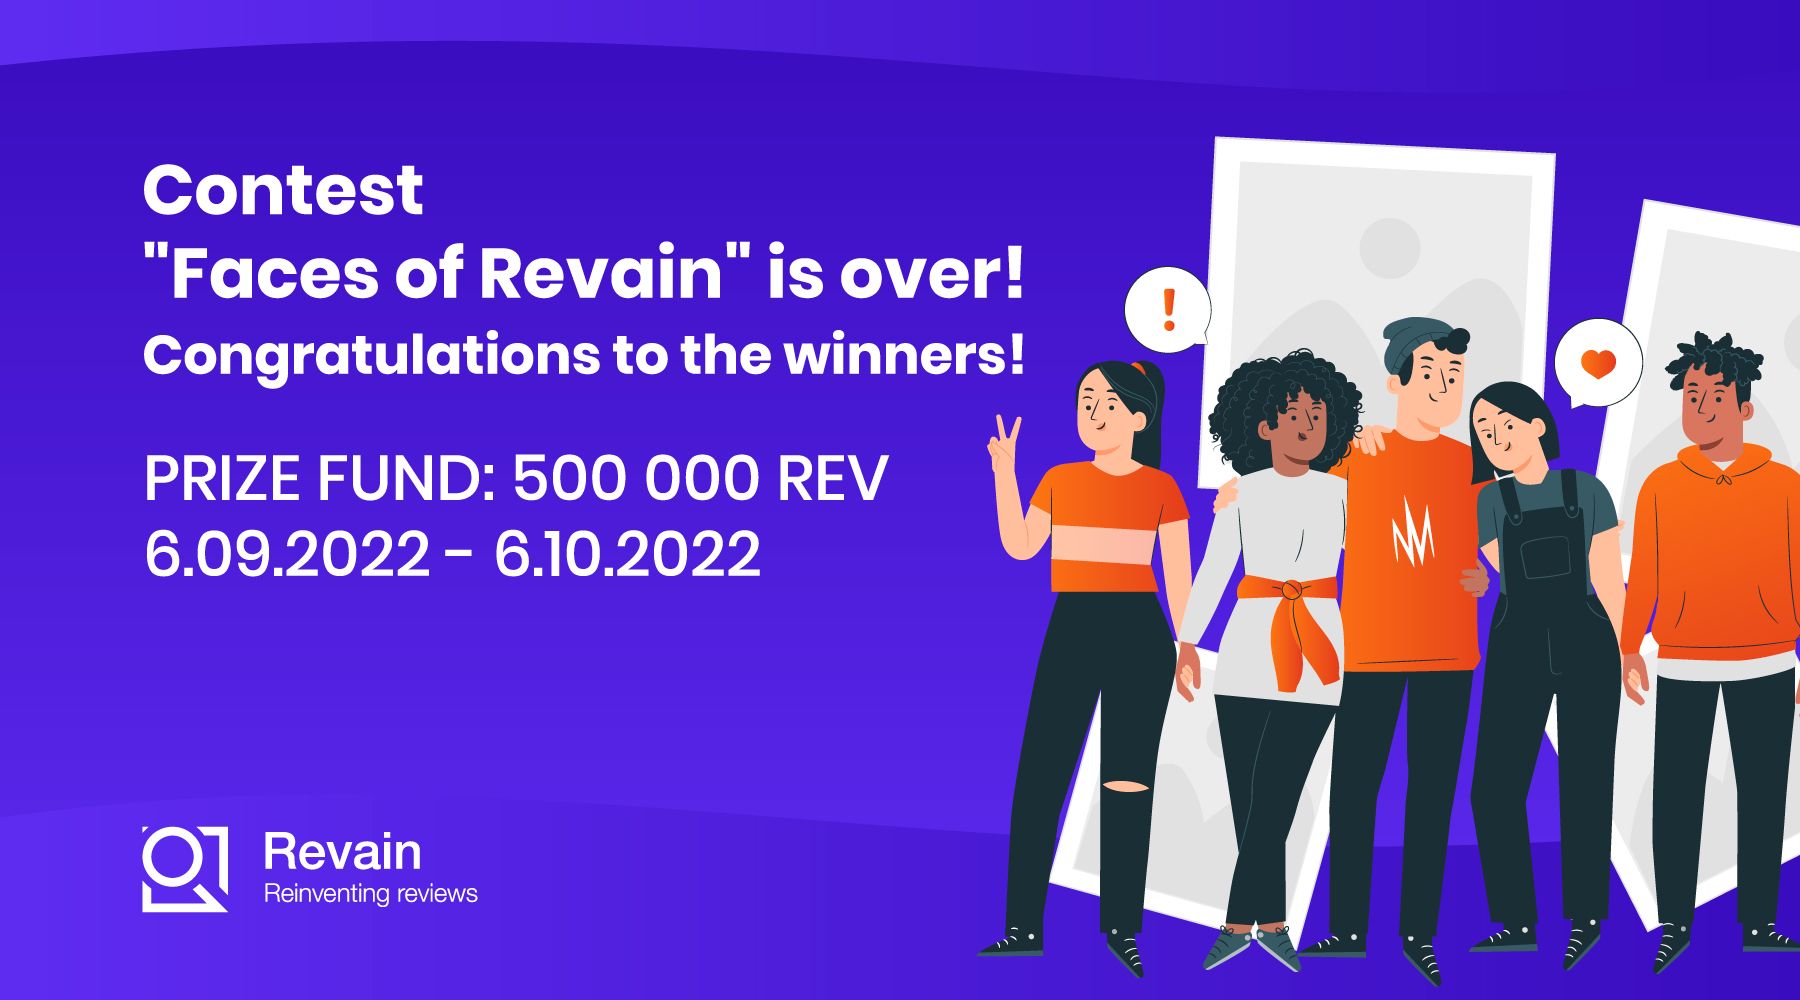 The photo contest "Faces of Revain" is over!